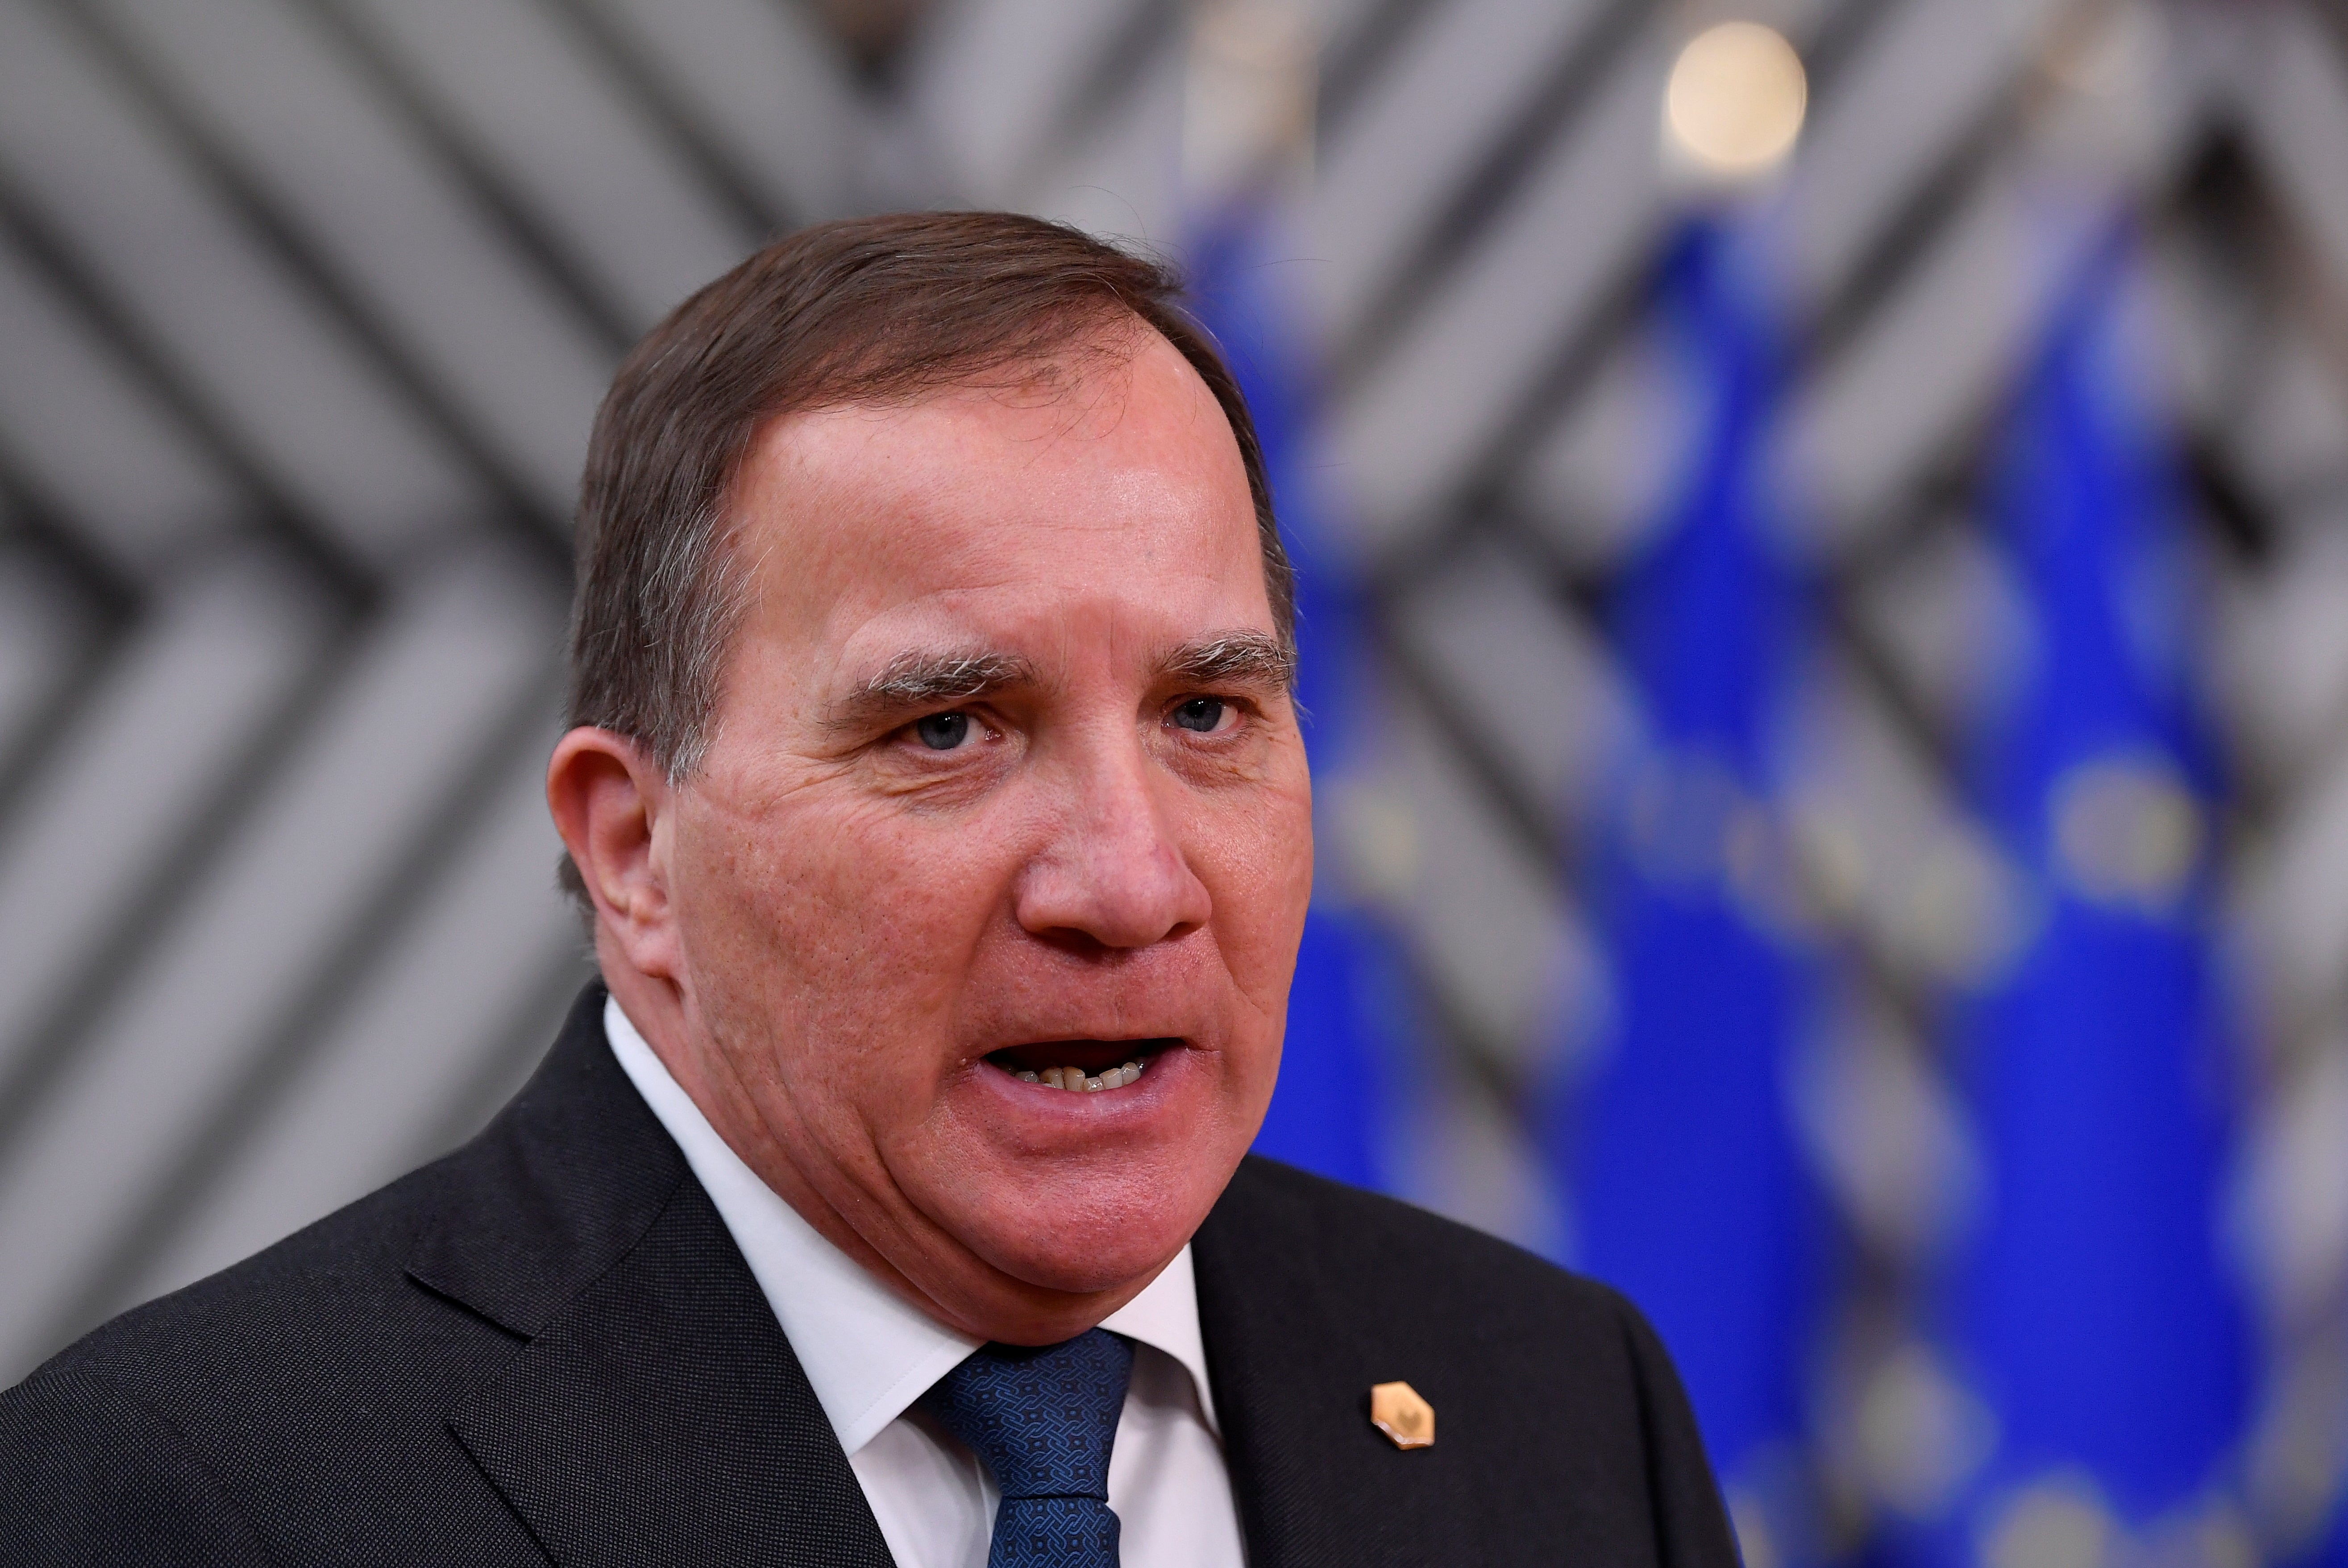 Sweden’s Prime Minister Stefan Lofven speaks as he arrives to attend a face-to-face EU summit amid the coronavirus disease (COVID-19) lockdown in Brussels, Belgium on 10 December 2020.